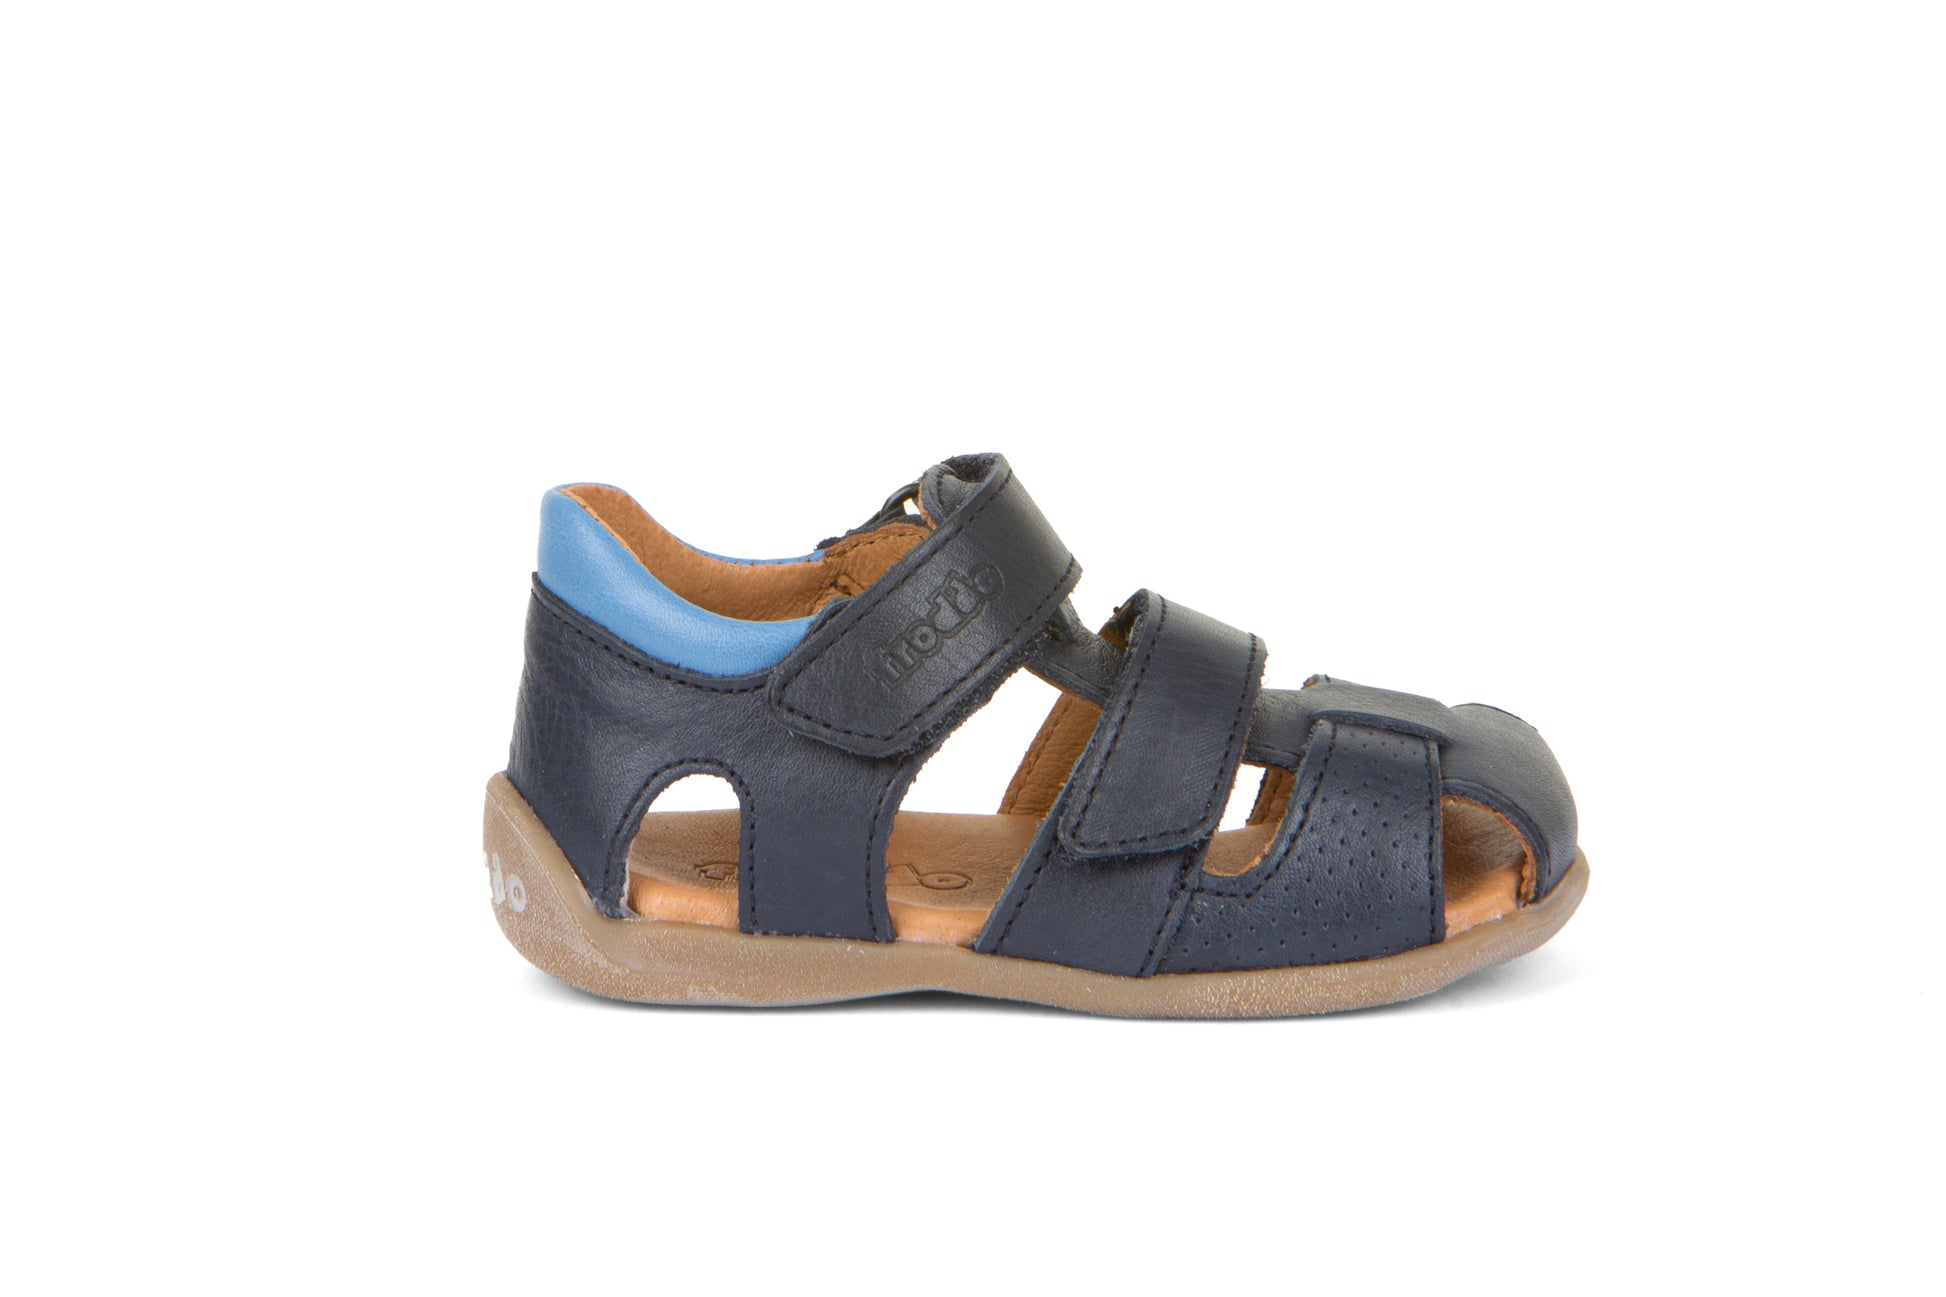 A boys closed toe sandal by Froddo, style G2150169 Carte Double, in navy with pale blue collar, velcro fastening. Right side view.